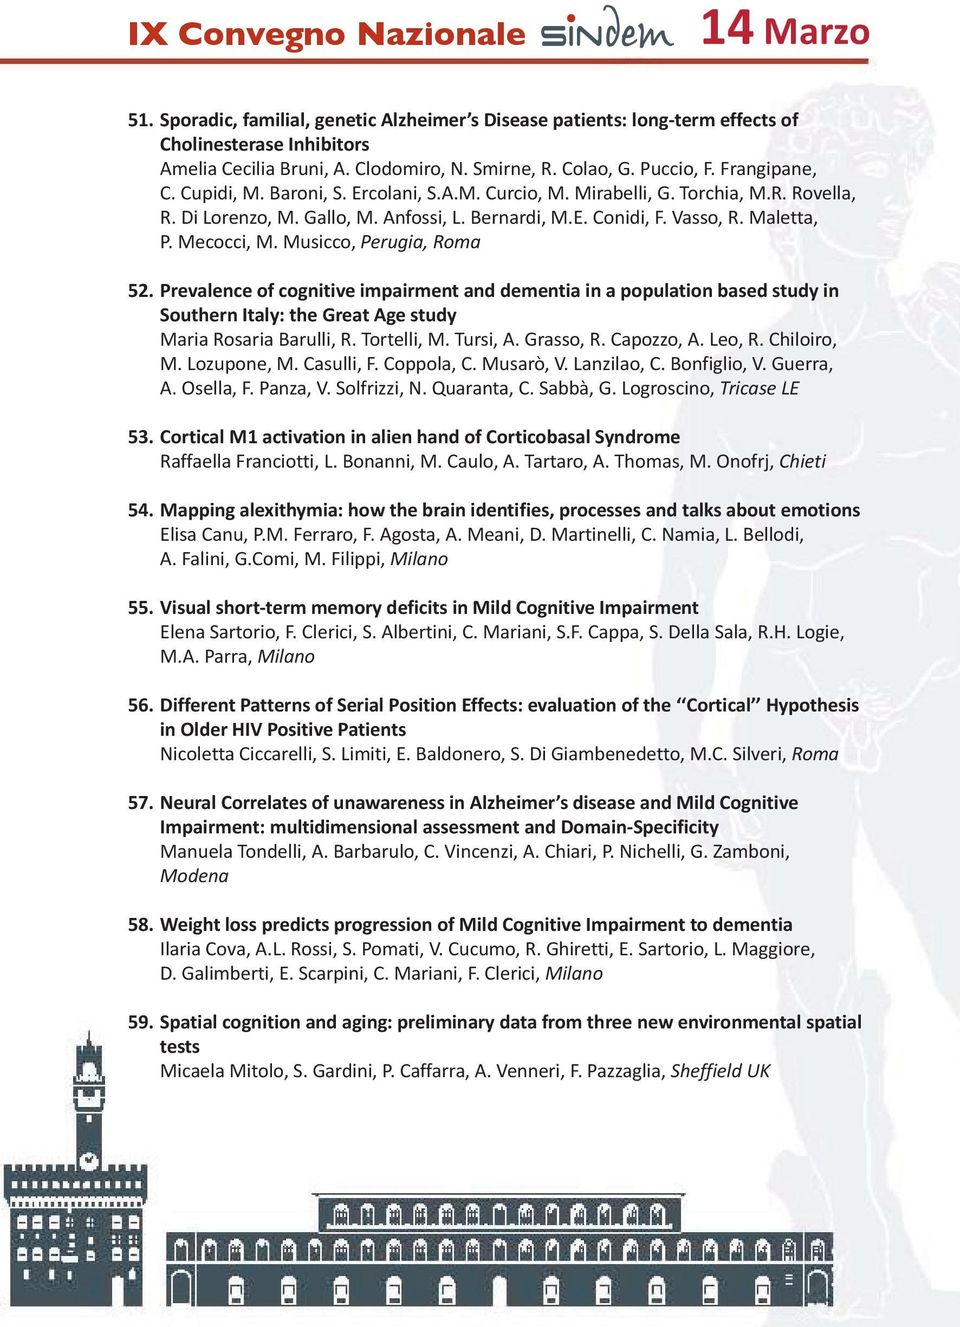 Mecocci, M. Musicco, Perugia, Roma 52. Prevalence of cognitive impairment and dementia in a population based study in Southern Italy: the Great Age study Maria Rosaria Barulli, R. Tortelli, M.